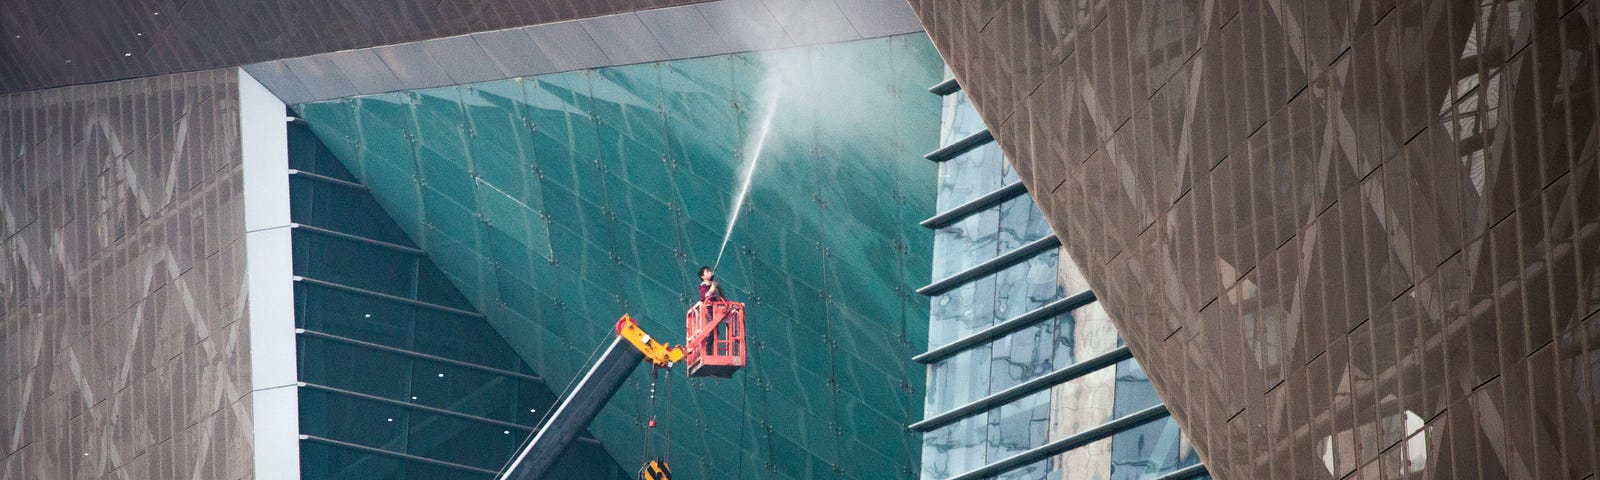 Cleaning angles on a building